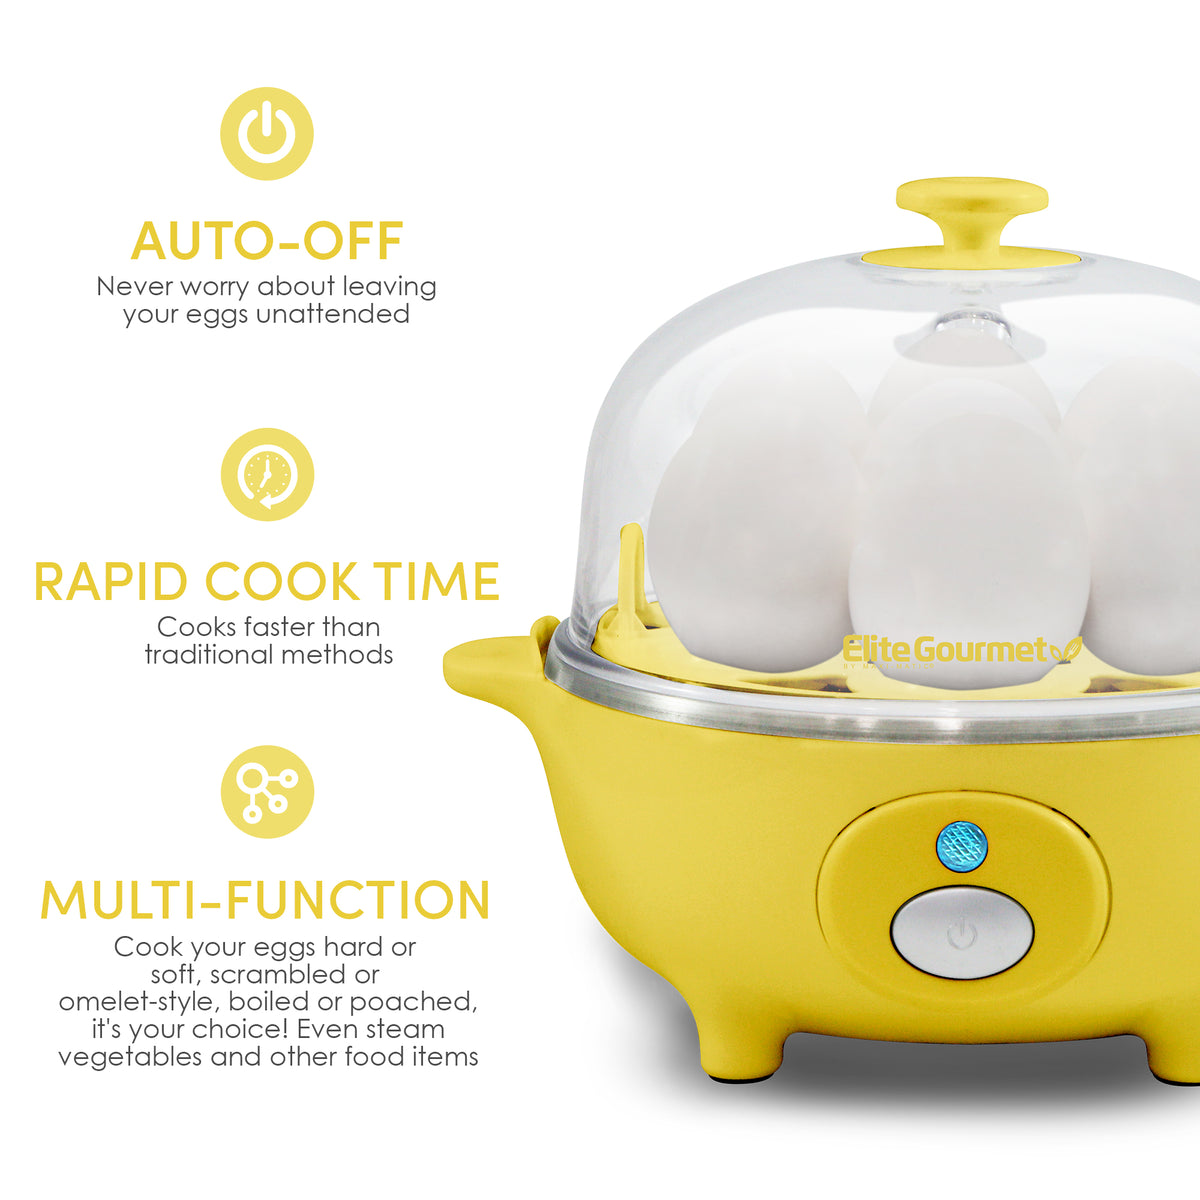 You Can Boil, Poach, & Make Omelets in This Bestselling Egg Cooker